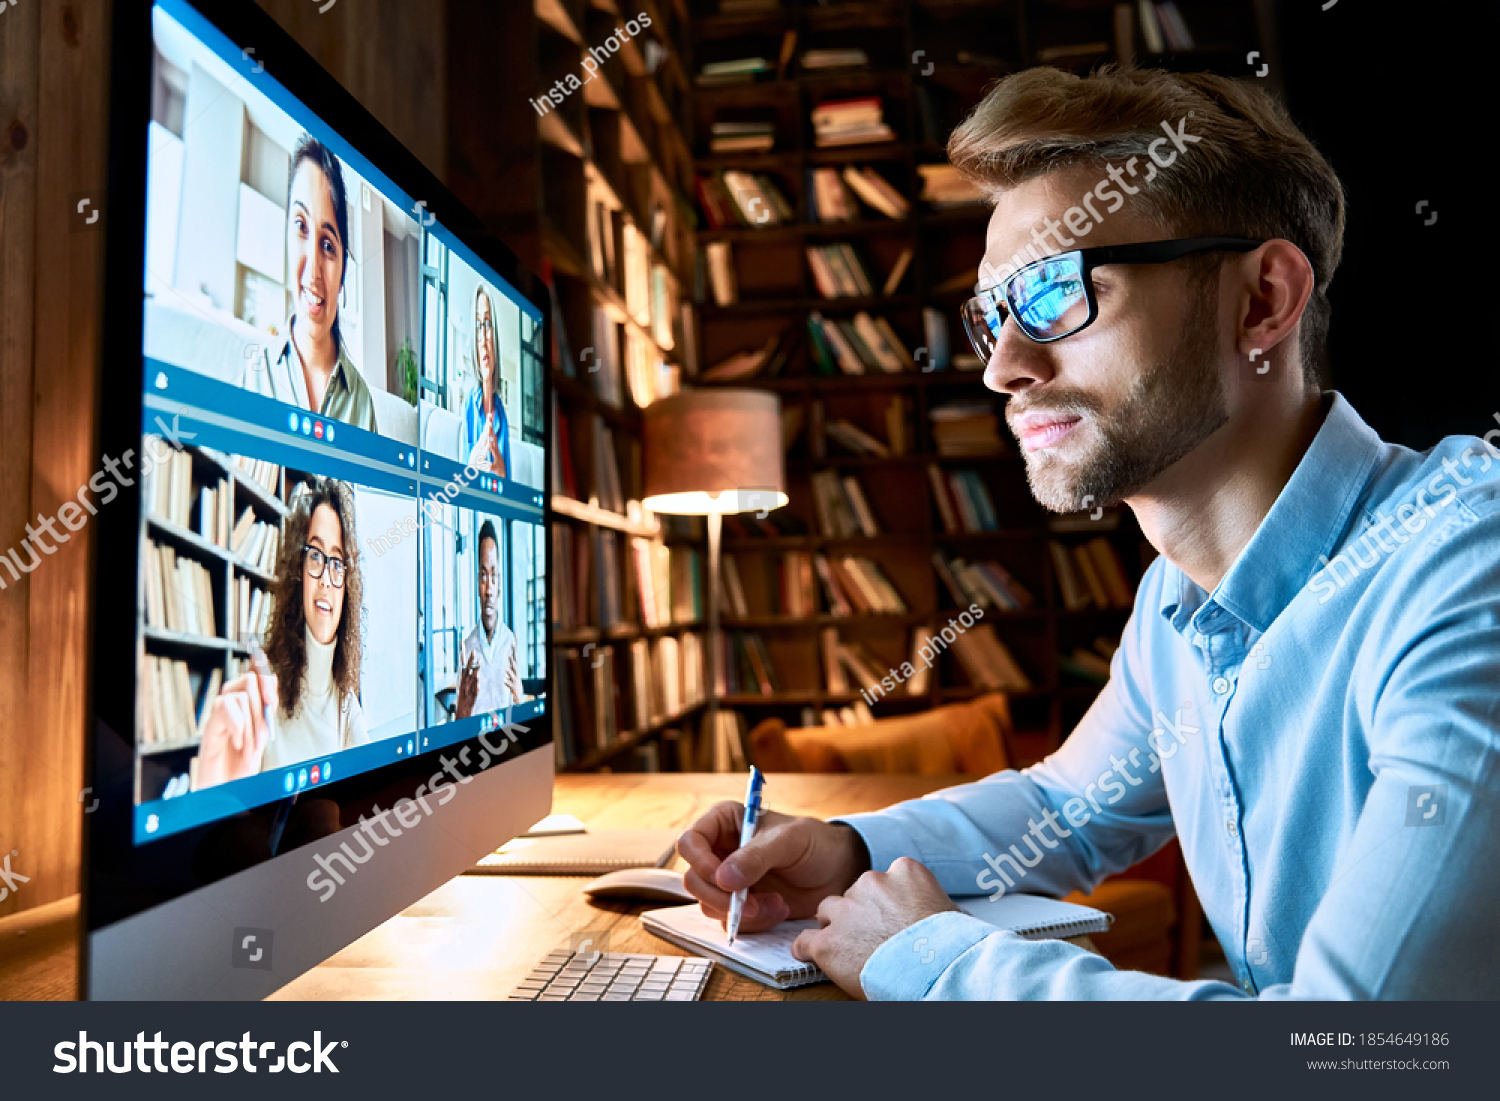 Business man having virtual team meeting on video conference call using computer. Social distance employee working from home office talking to diverse colleagues in remote videoconference online chat. #1854649186